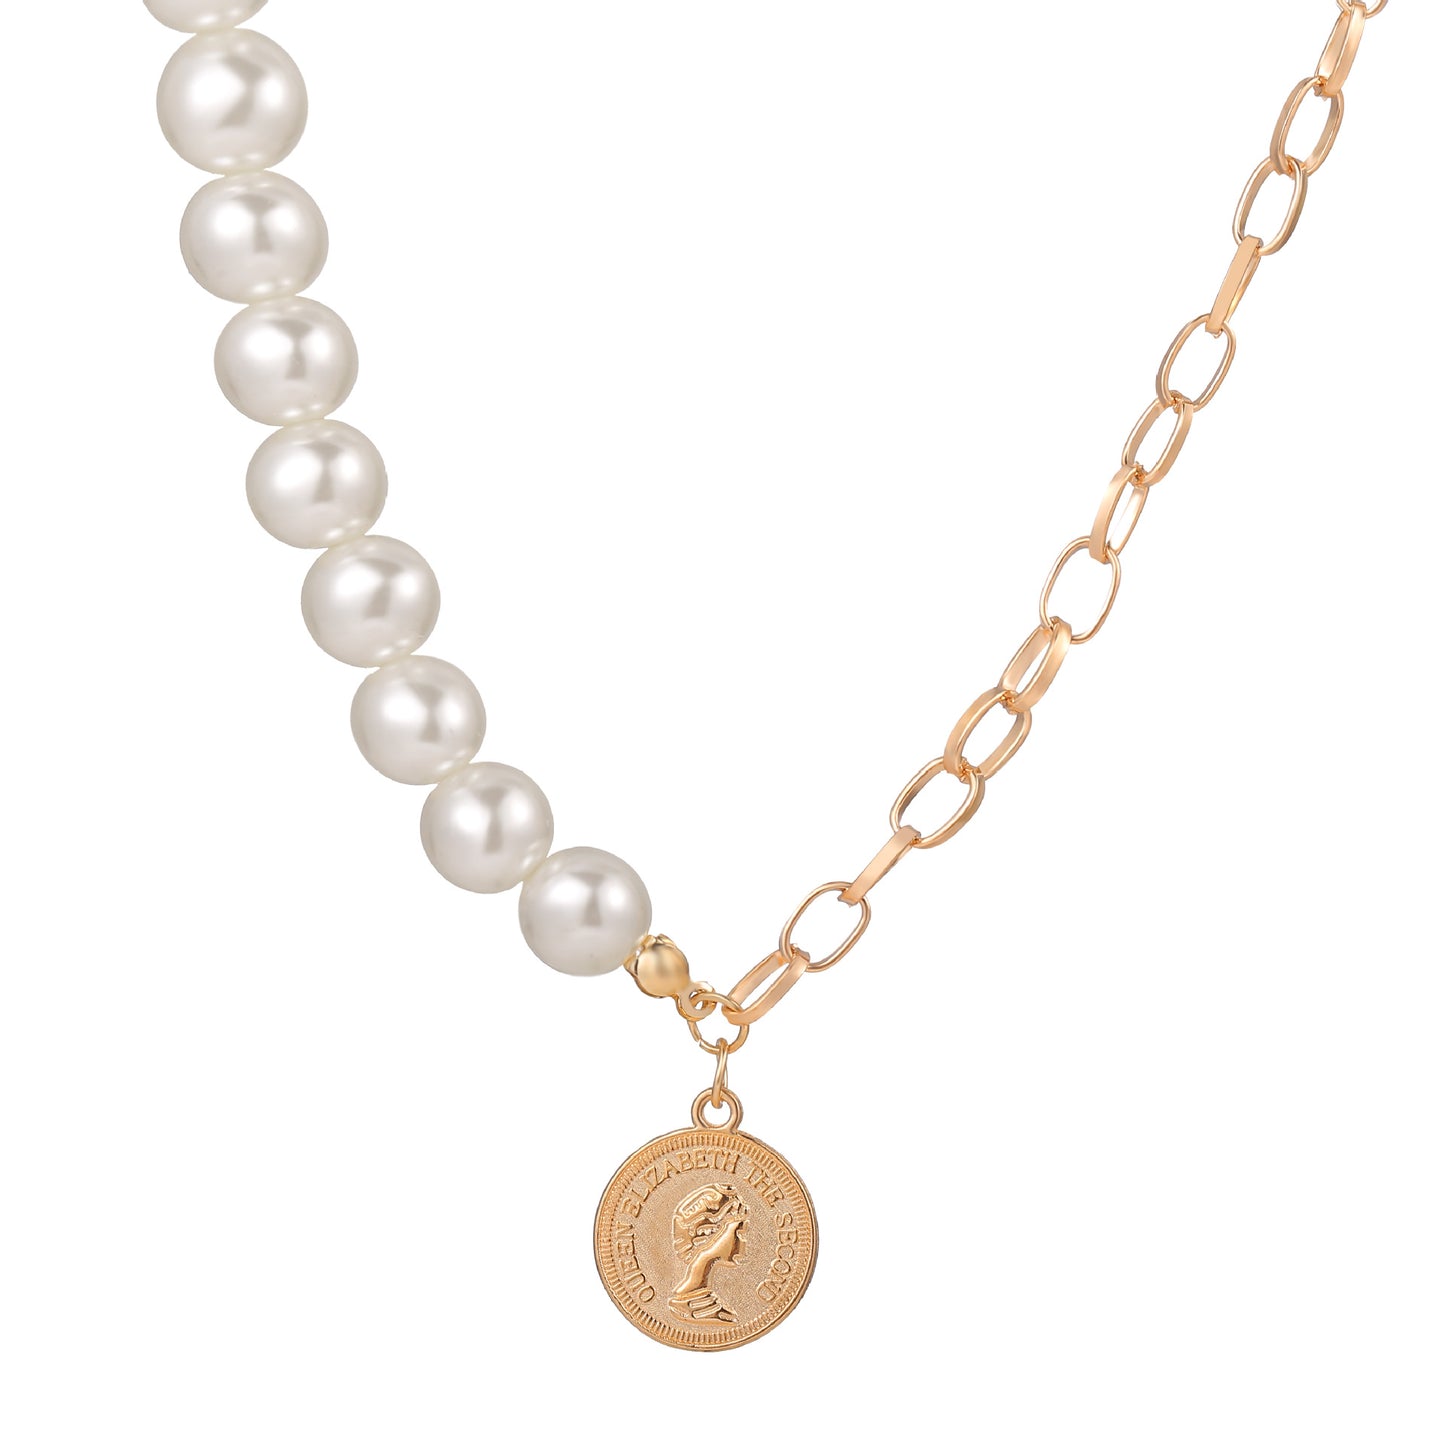 fashion brass alloy abs pearl beads with Elizabeth Queen Coin Pendant Necklace Jewelry for Women